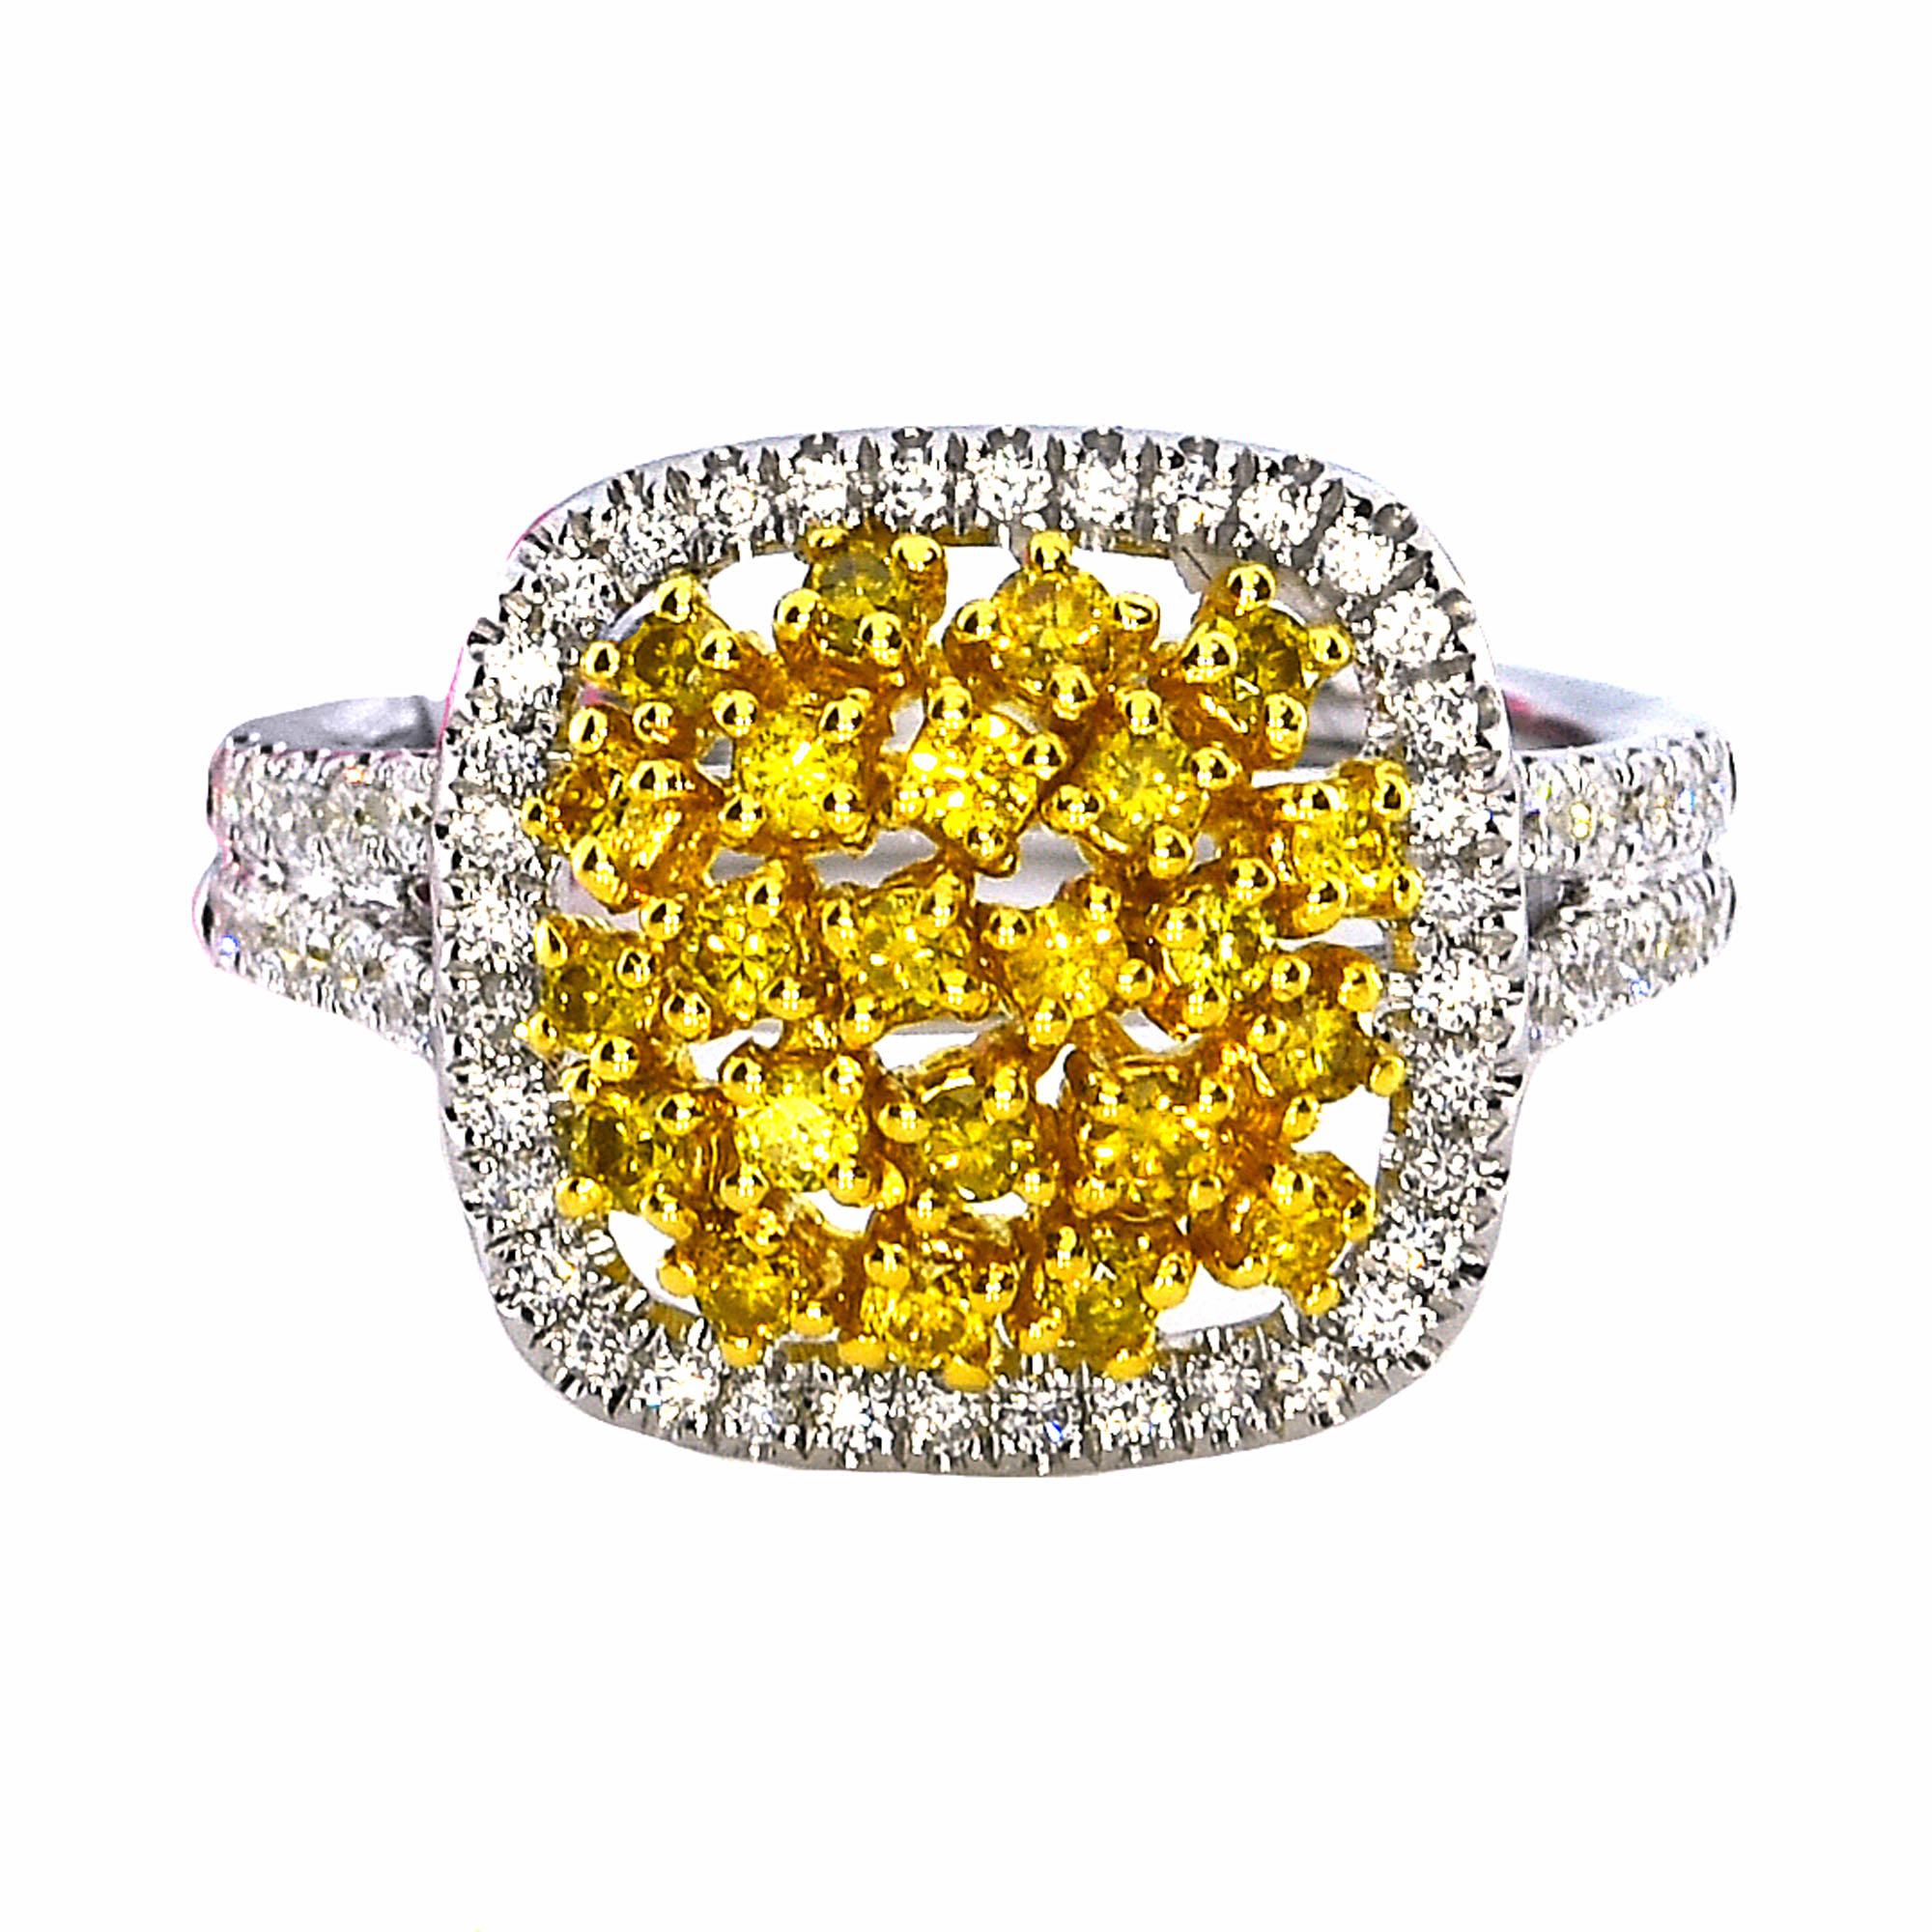 Modern 0.99 Carat Natural Fancy Intense Yellow Diamond Cluster Ring For Sale